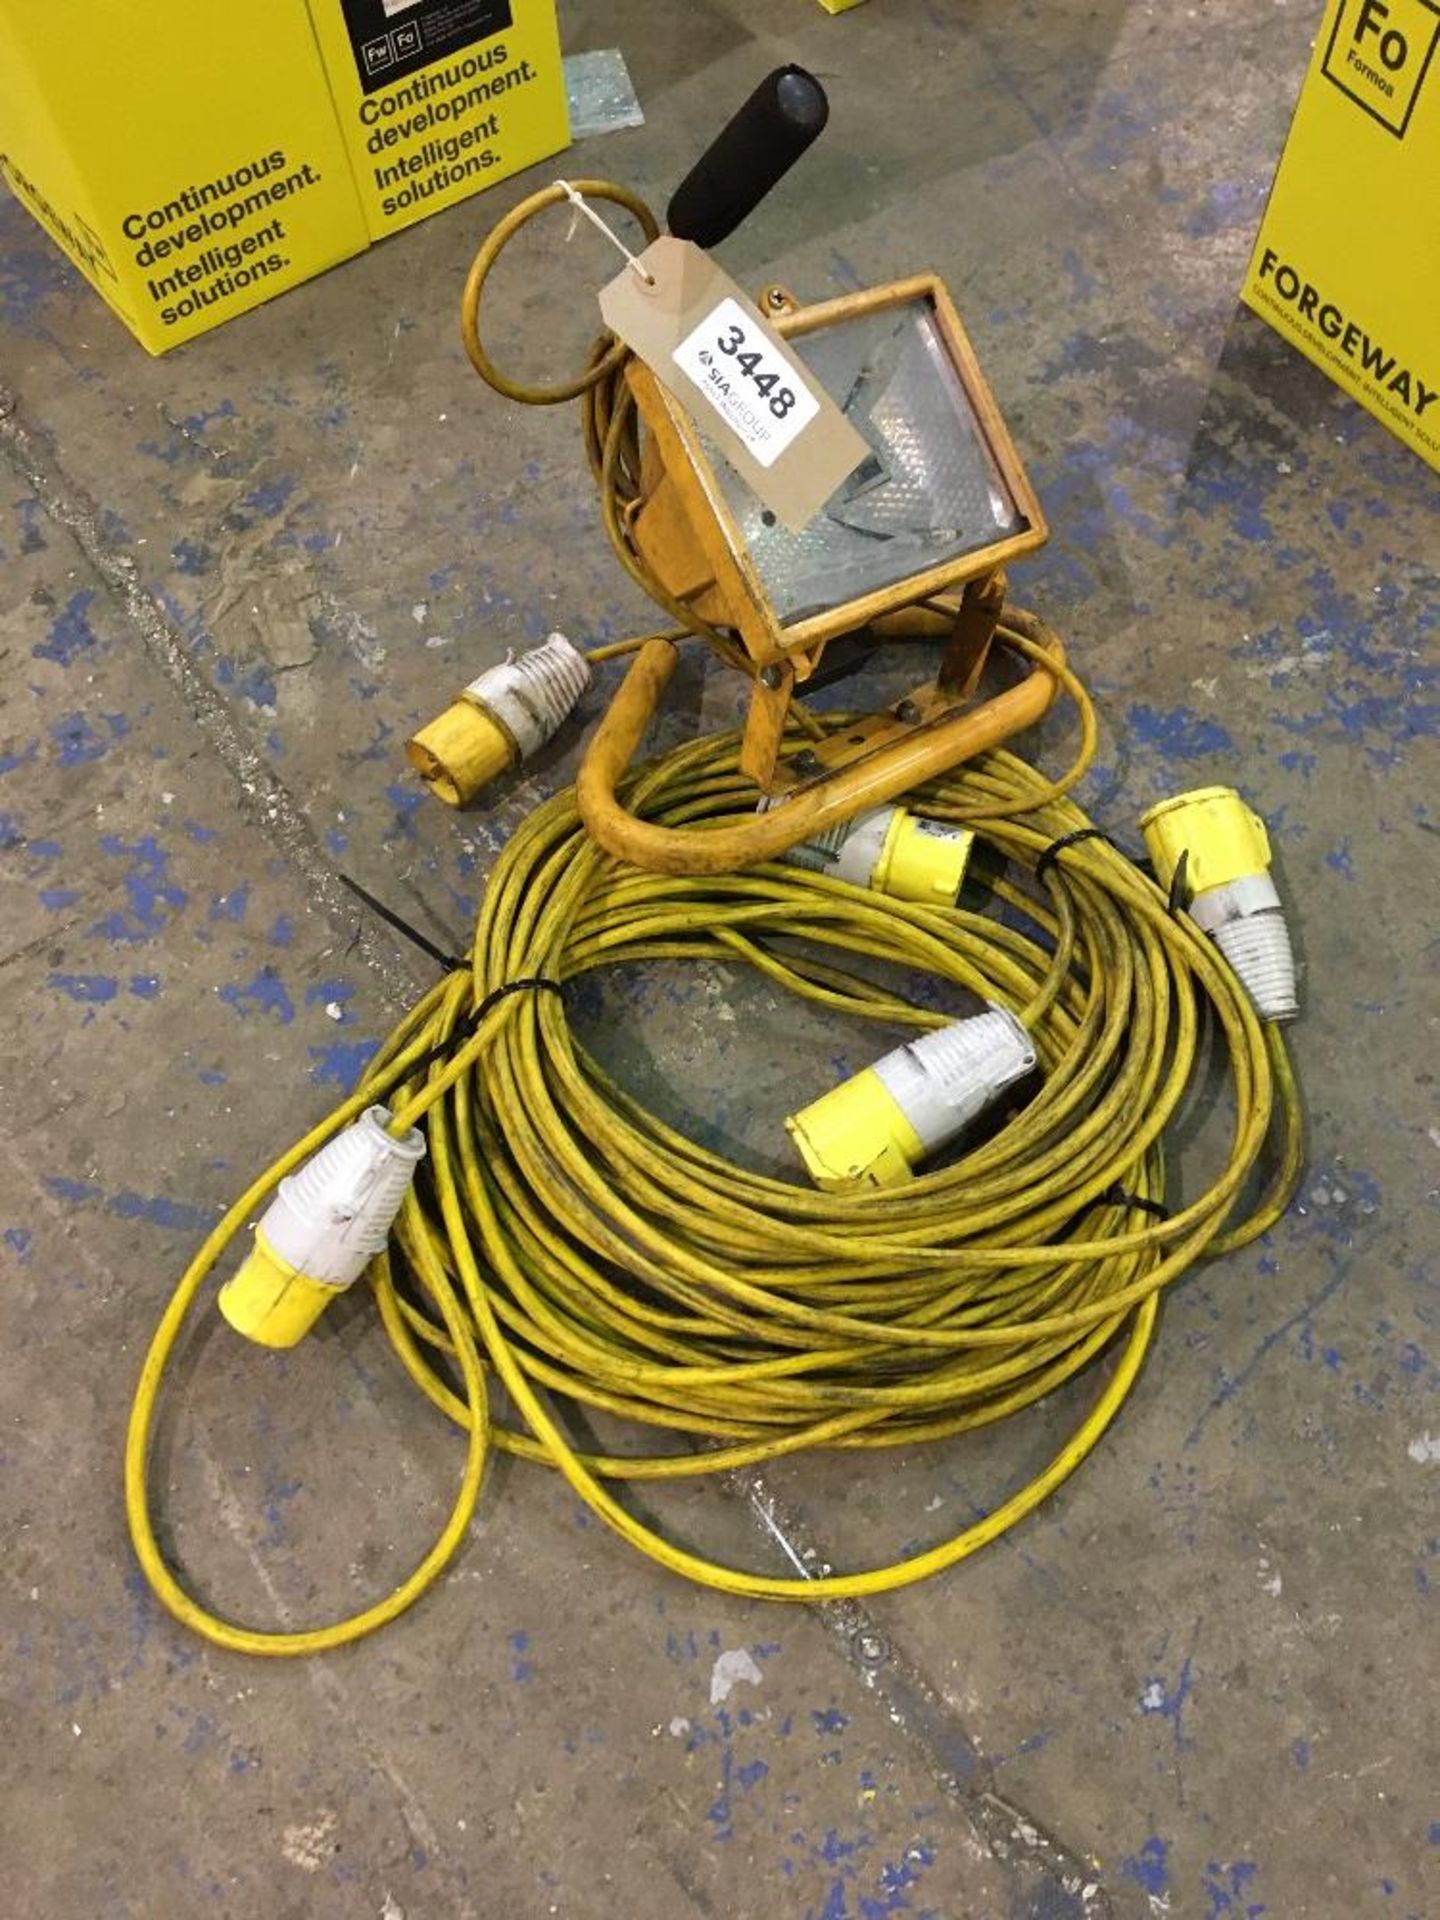 (2) 110v extension cables with 110v floodlight - Image 2 of 2